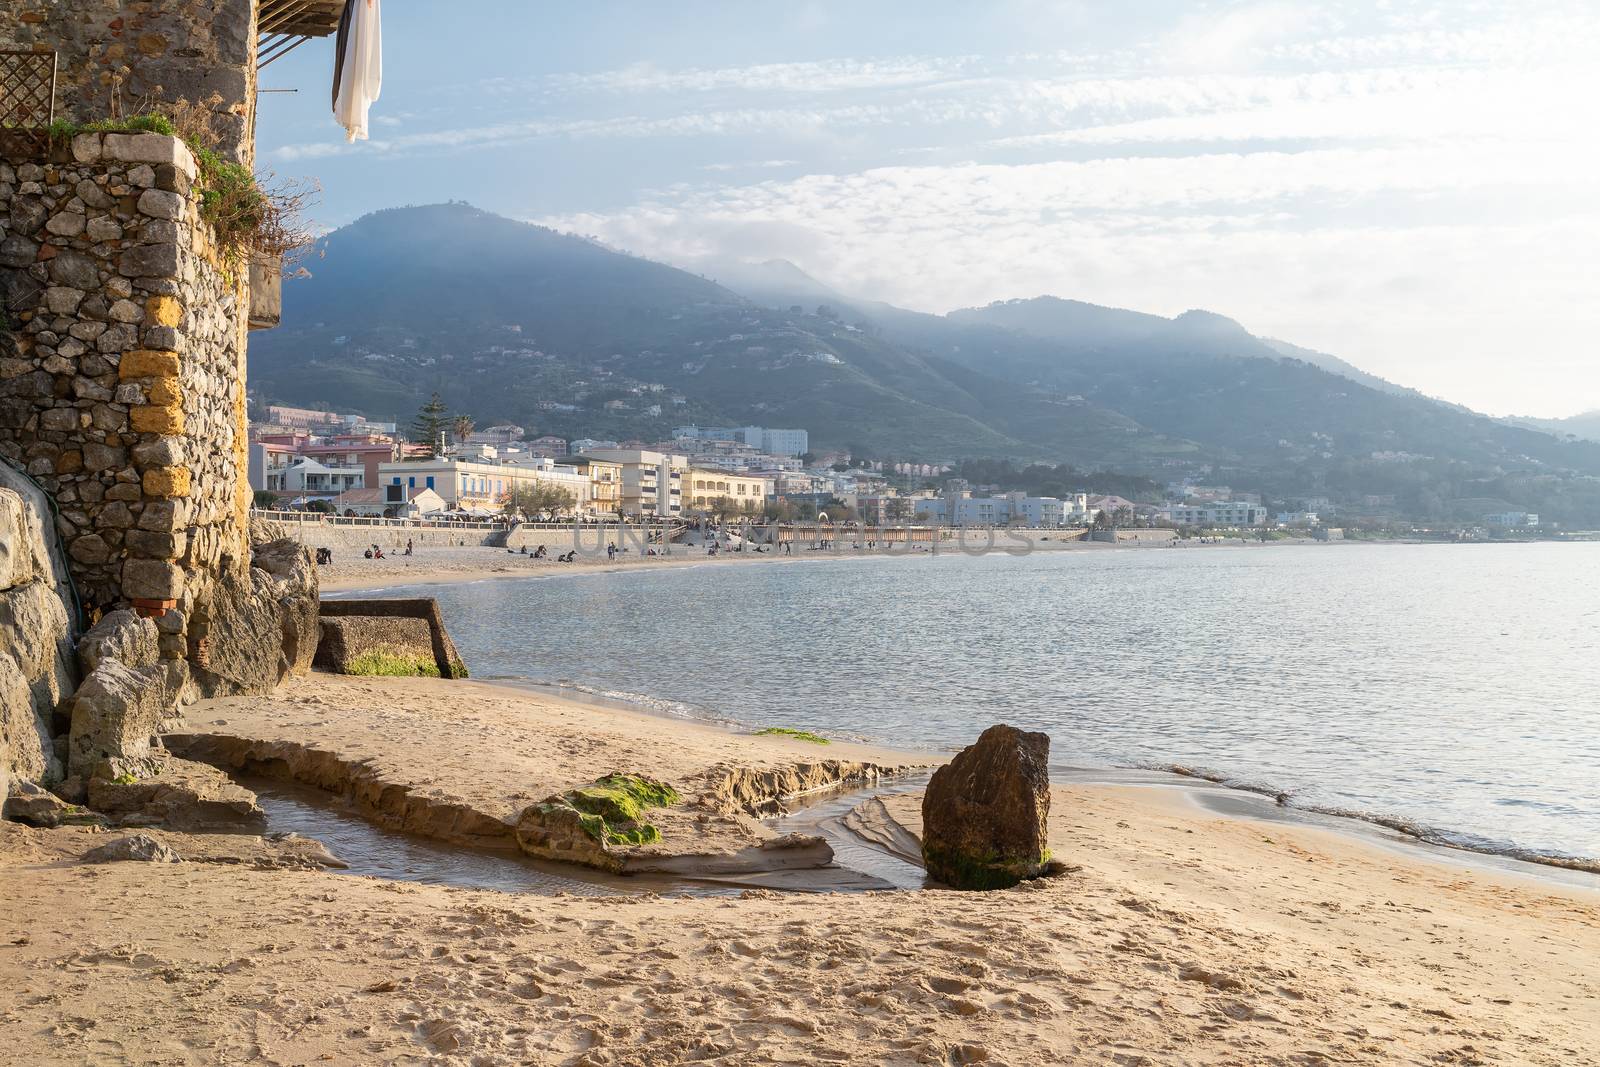 Idyllic view of long sandy beach with mountains in the background, seen from the old harbour on a sunny day in Cefalu, Sicily, Southern Italy. by tamas_gabor